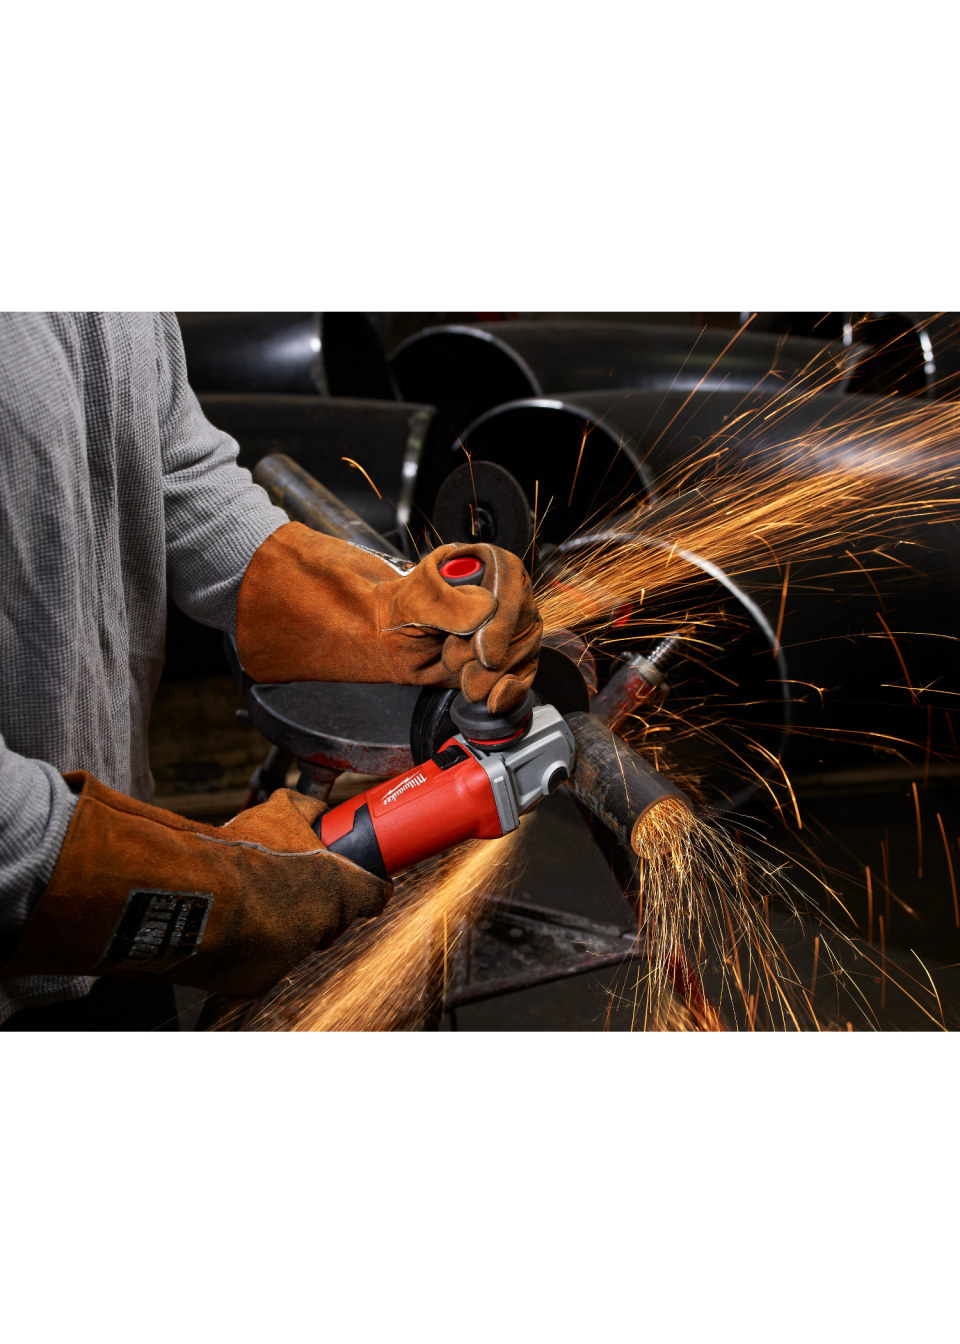 Milwaukee Tool Corded Angle Grinder: 6″ Wheel Dia, 9,000 RPM, 5/8-11  Spindle 87181541 MSC Industrial Supply